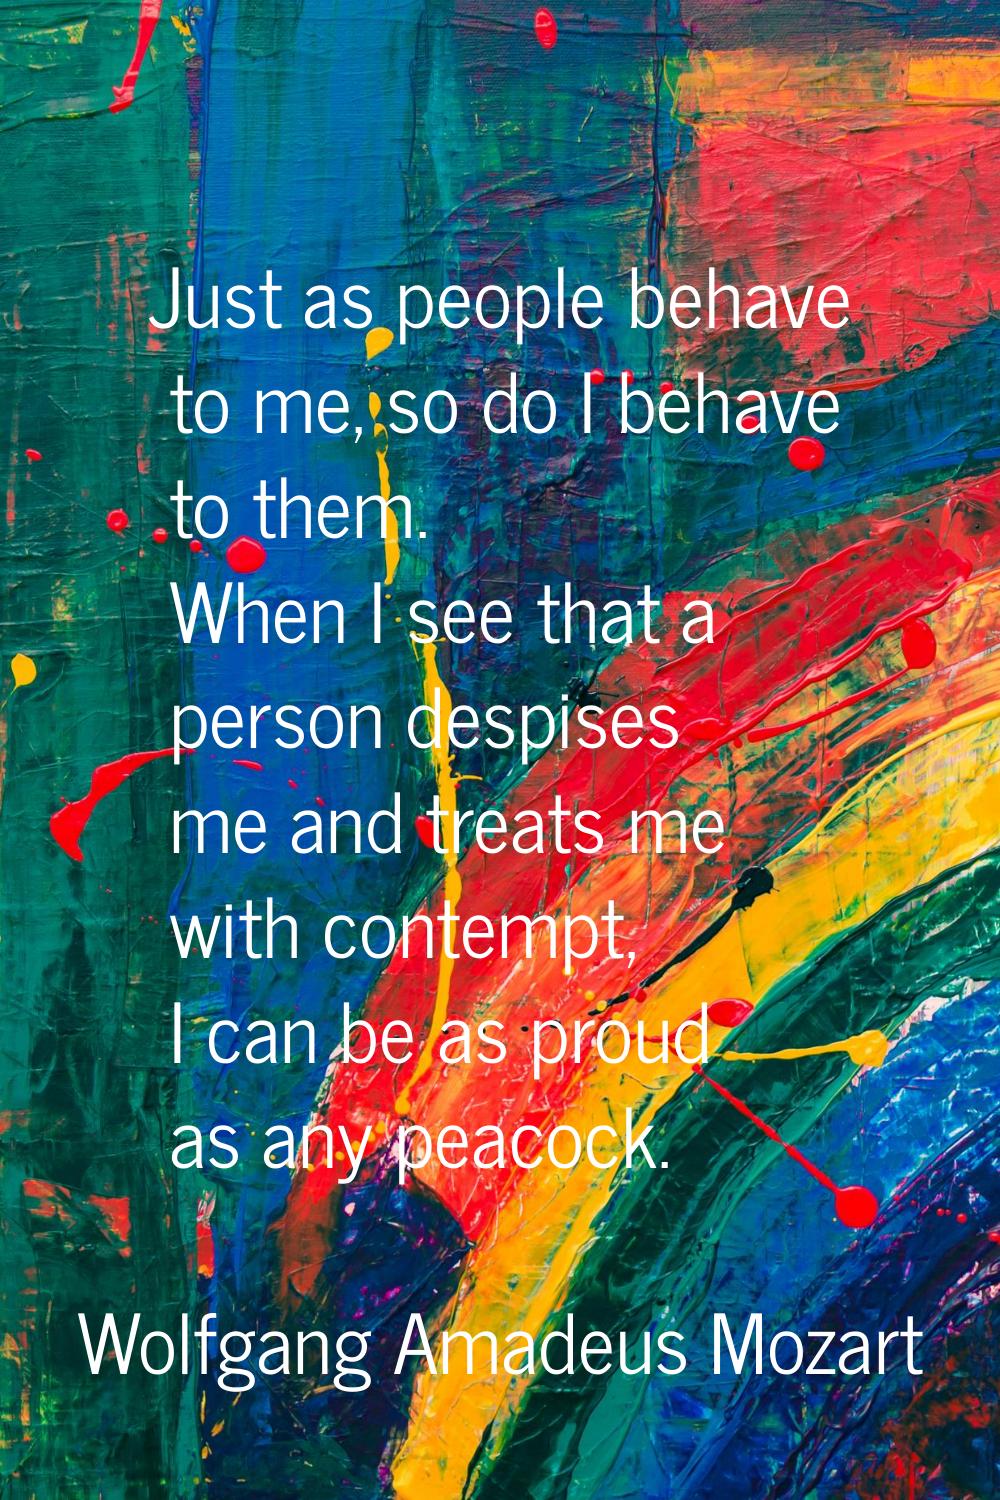 Just as people behave to me, so do I behave to them. When I see that a person despises me and treat